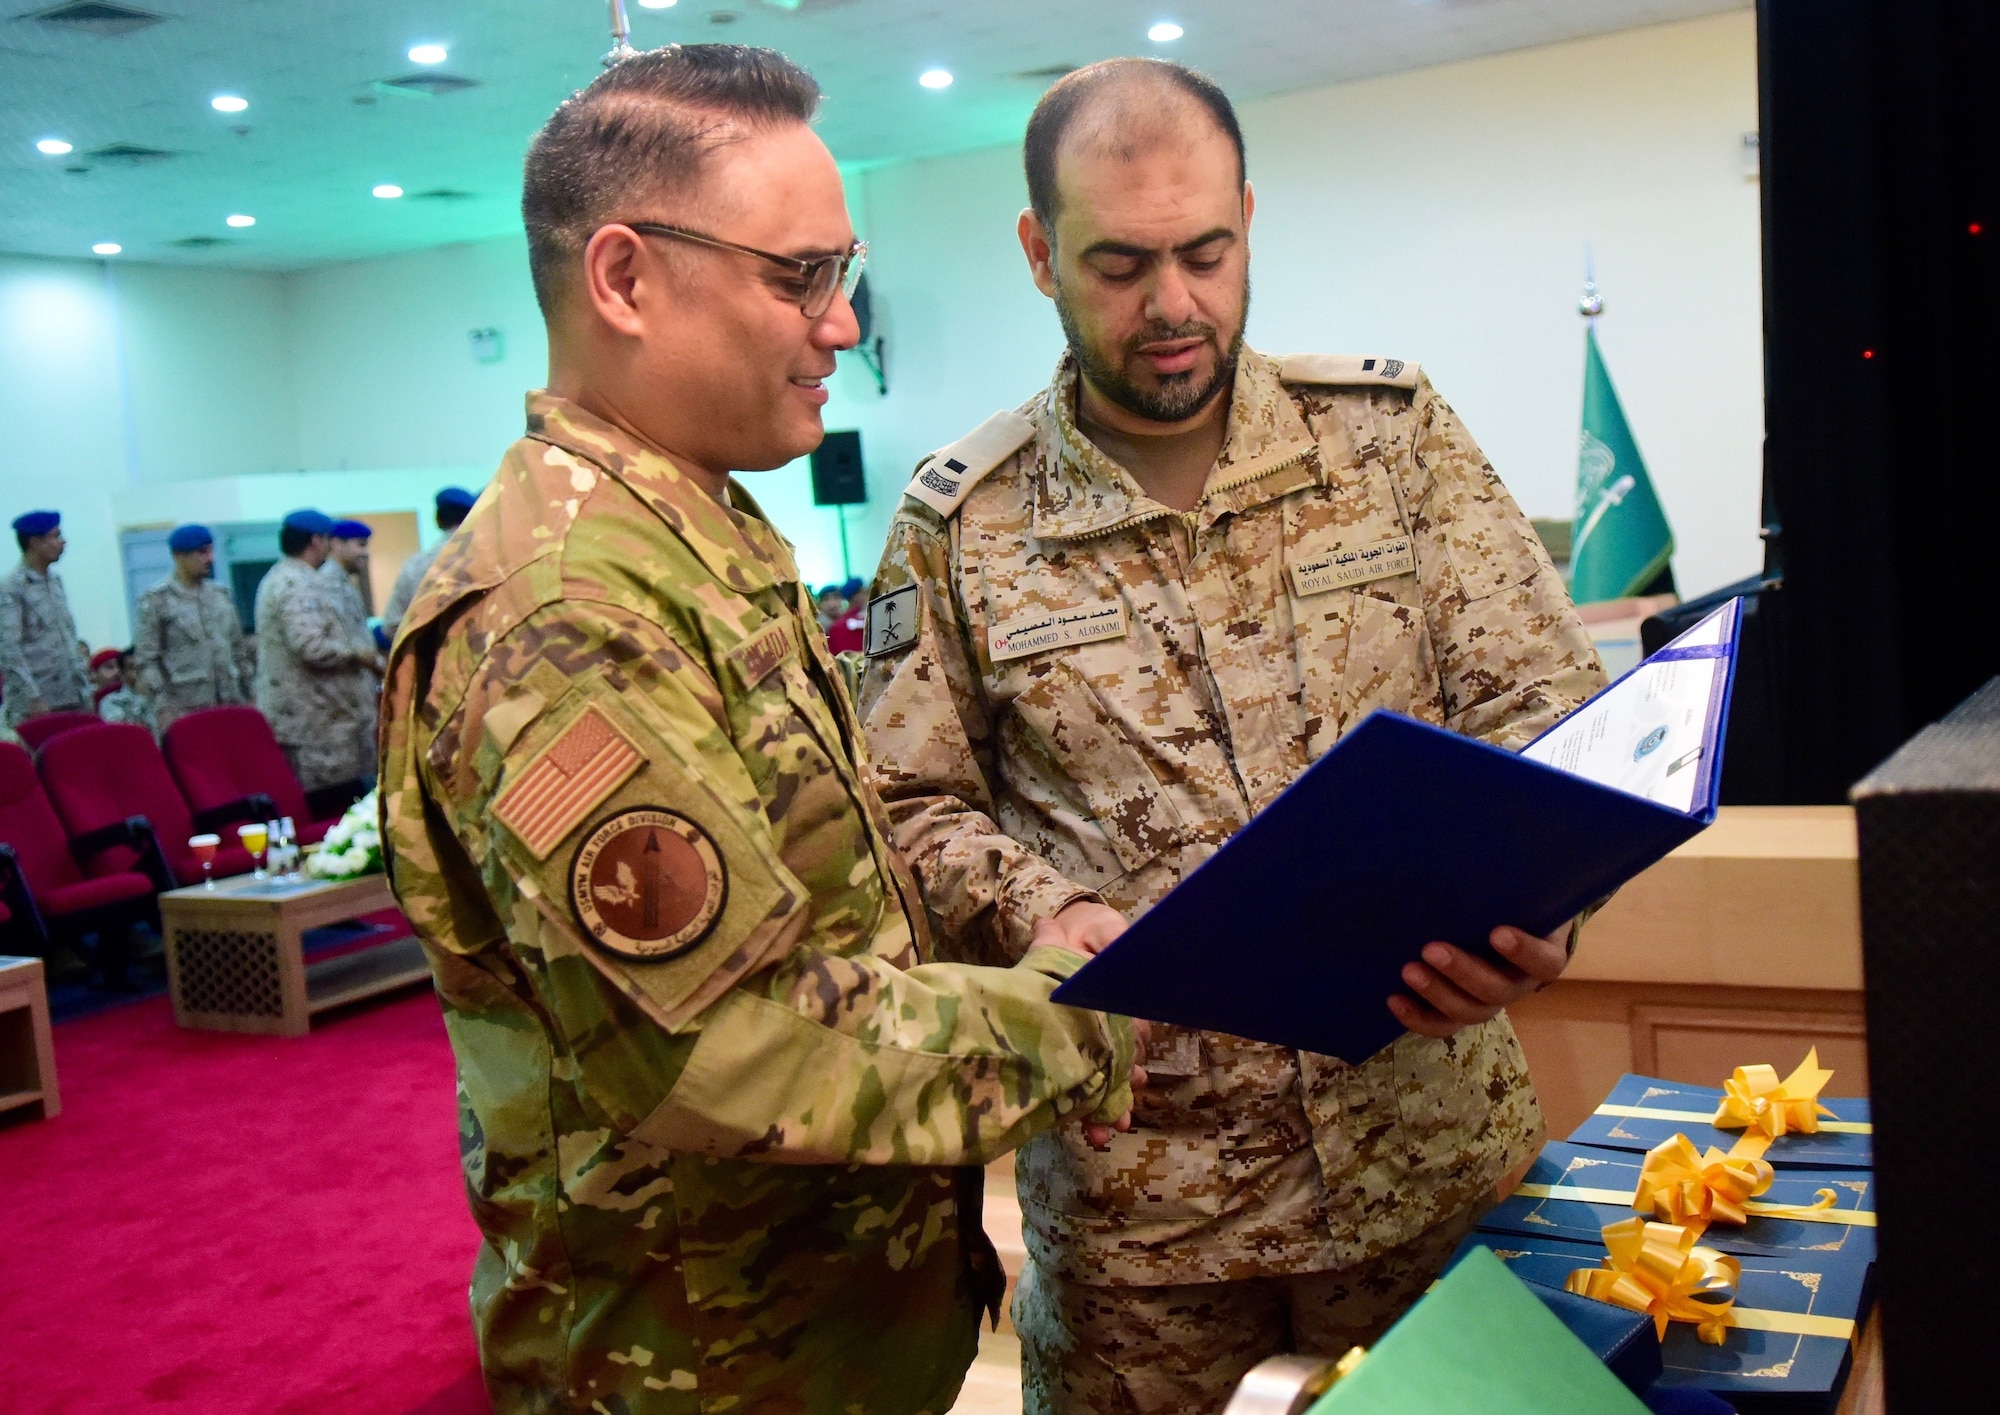 U.S. Air Force Col. Ronald M. Llantada, U.S. Military Training Mission- Kingdom of Saudi Arabia chief, reviews the graduation certificates and awards from the Royal Saudi Air Force’s first SNCO professional military education program graduation ceremony with Chief Master Sgt. of the Royal Saudi Air Force Mohammed Alosaimi on Dec. 11, 2019, at King Solomon Air Base, Kingdom of Saudi Arabia.